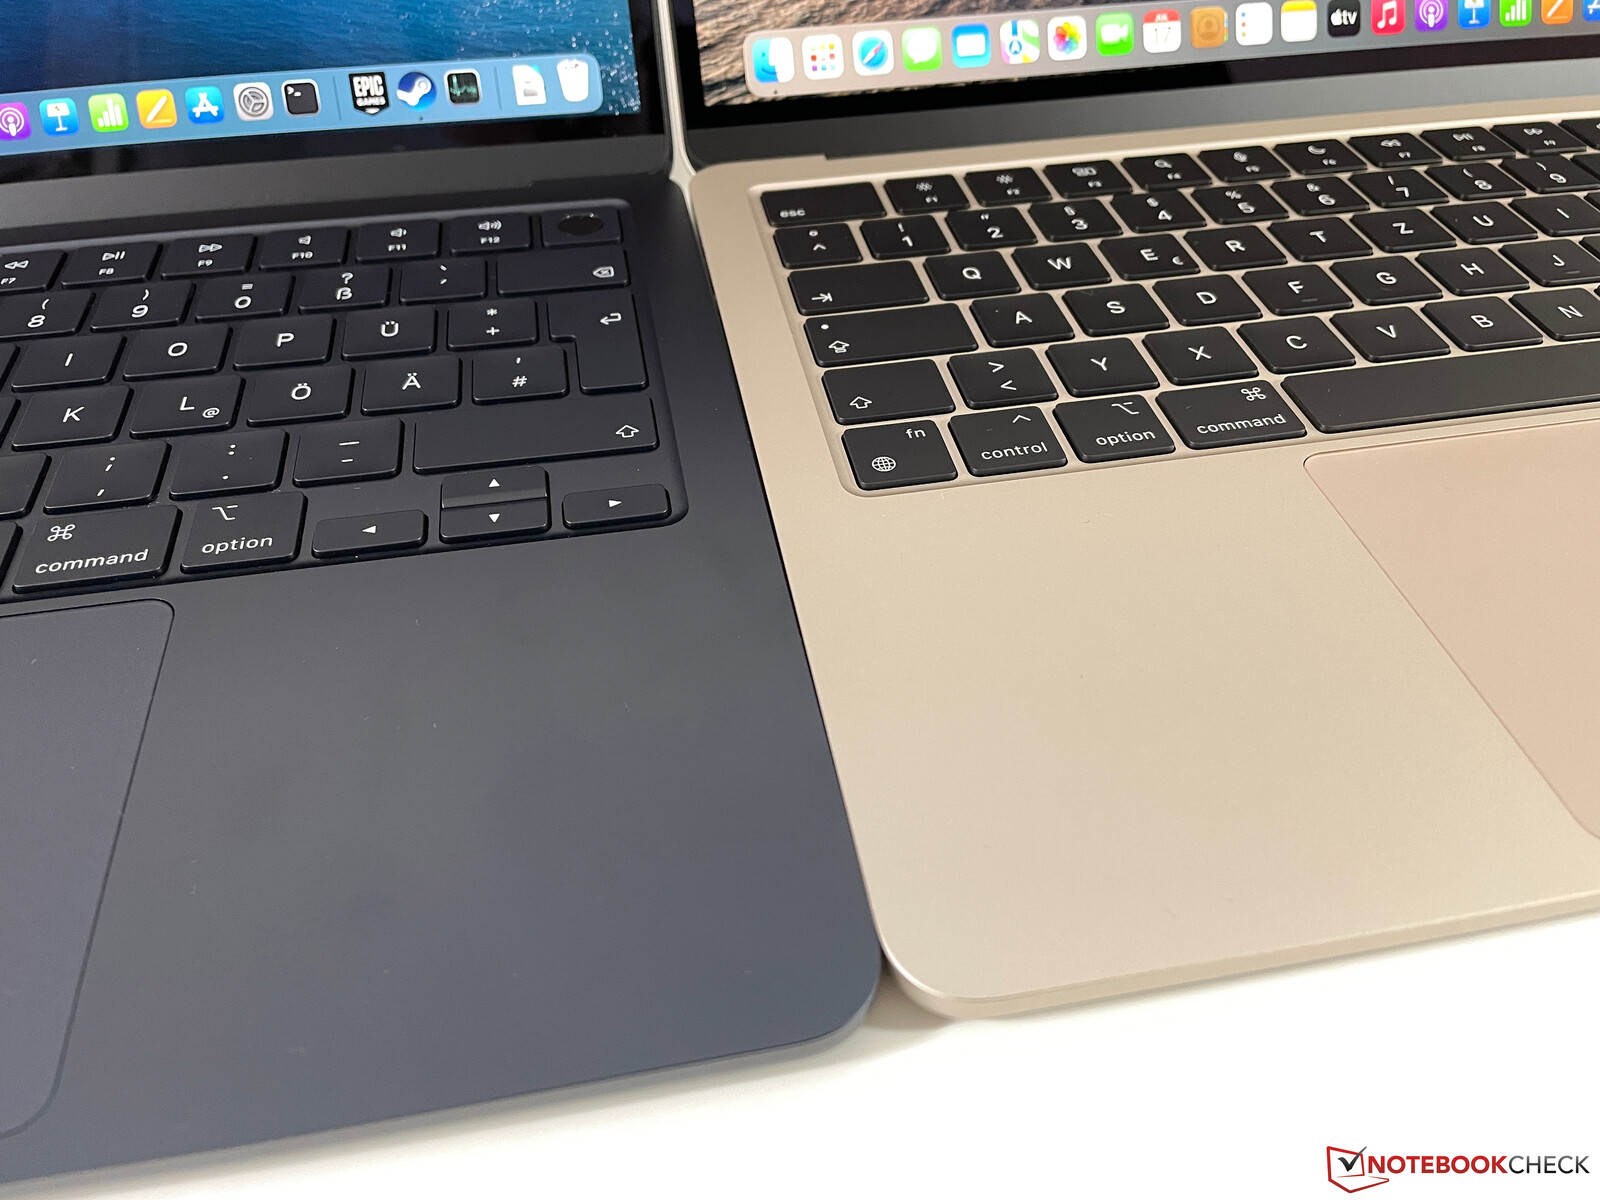 M3-powered MacBook Air unlikely to debut at WWDC 2023